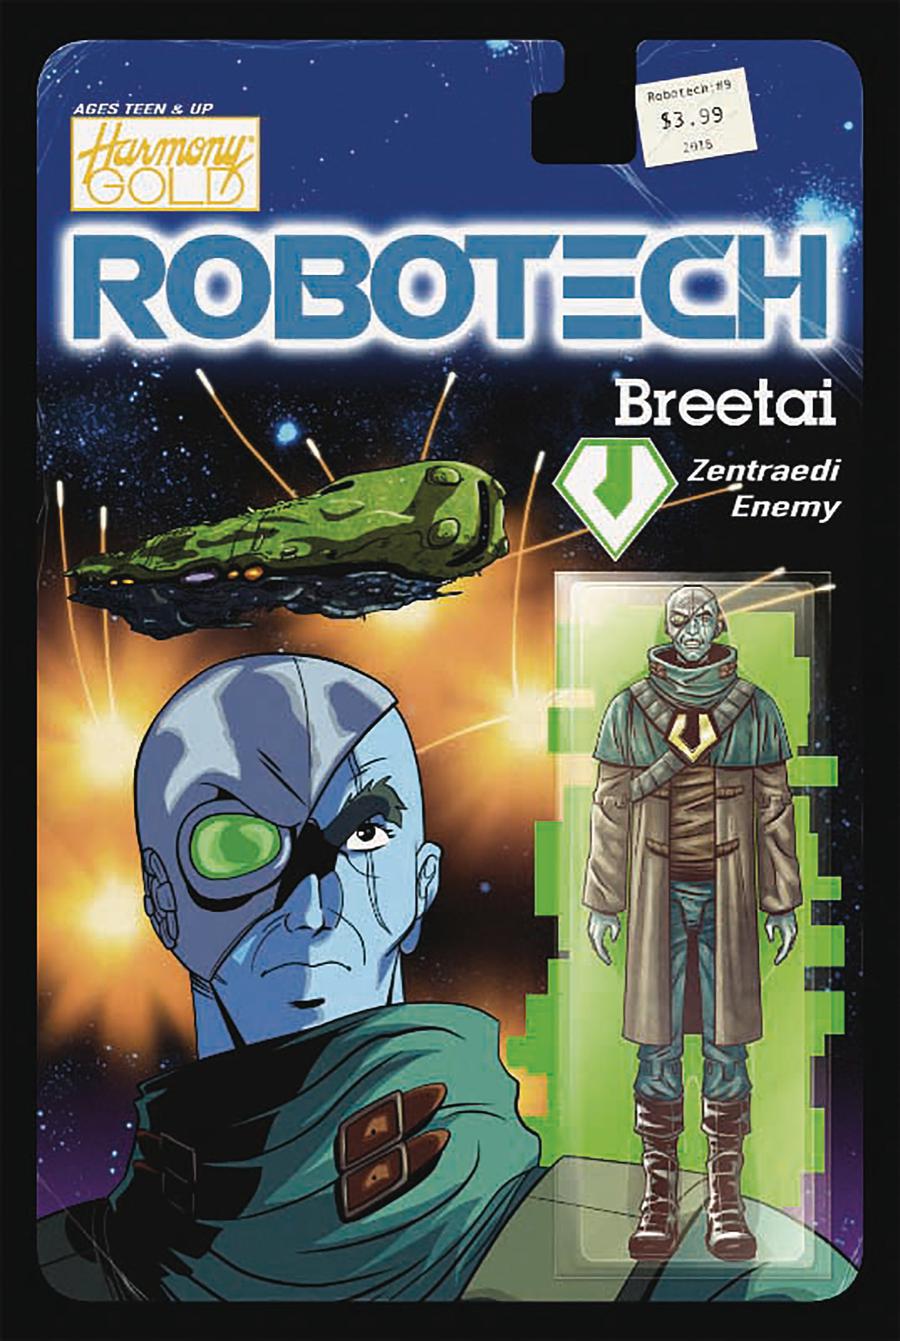 Robotech Vol 3 #9 Cover B Variant Action Figure Cover